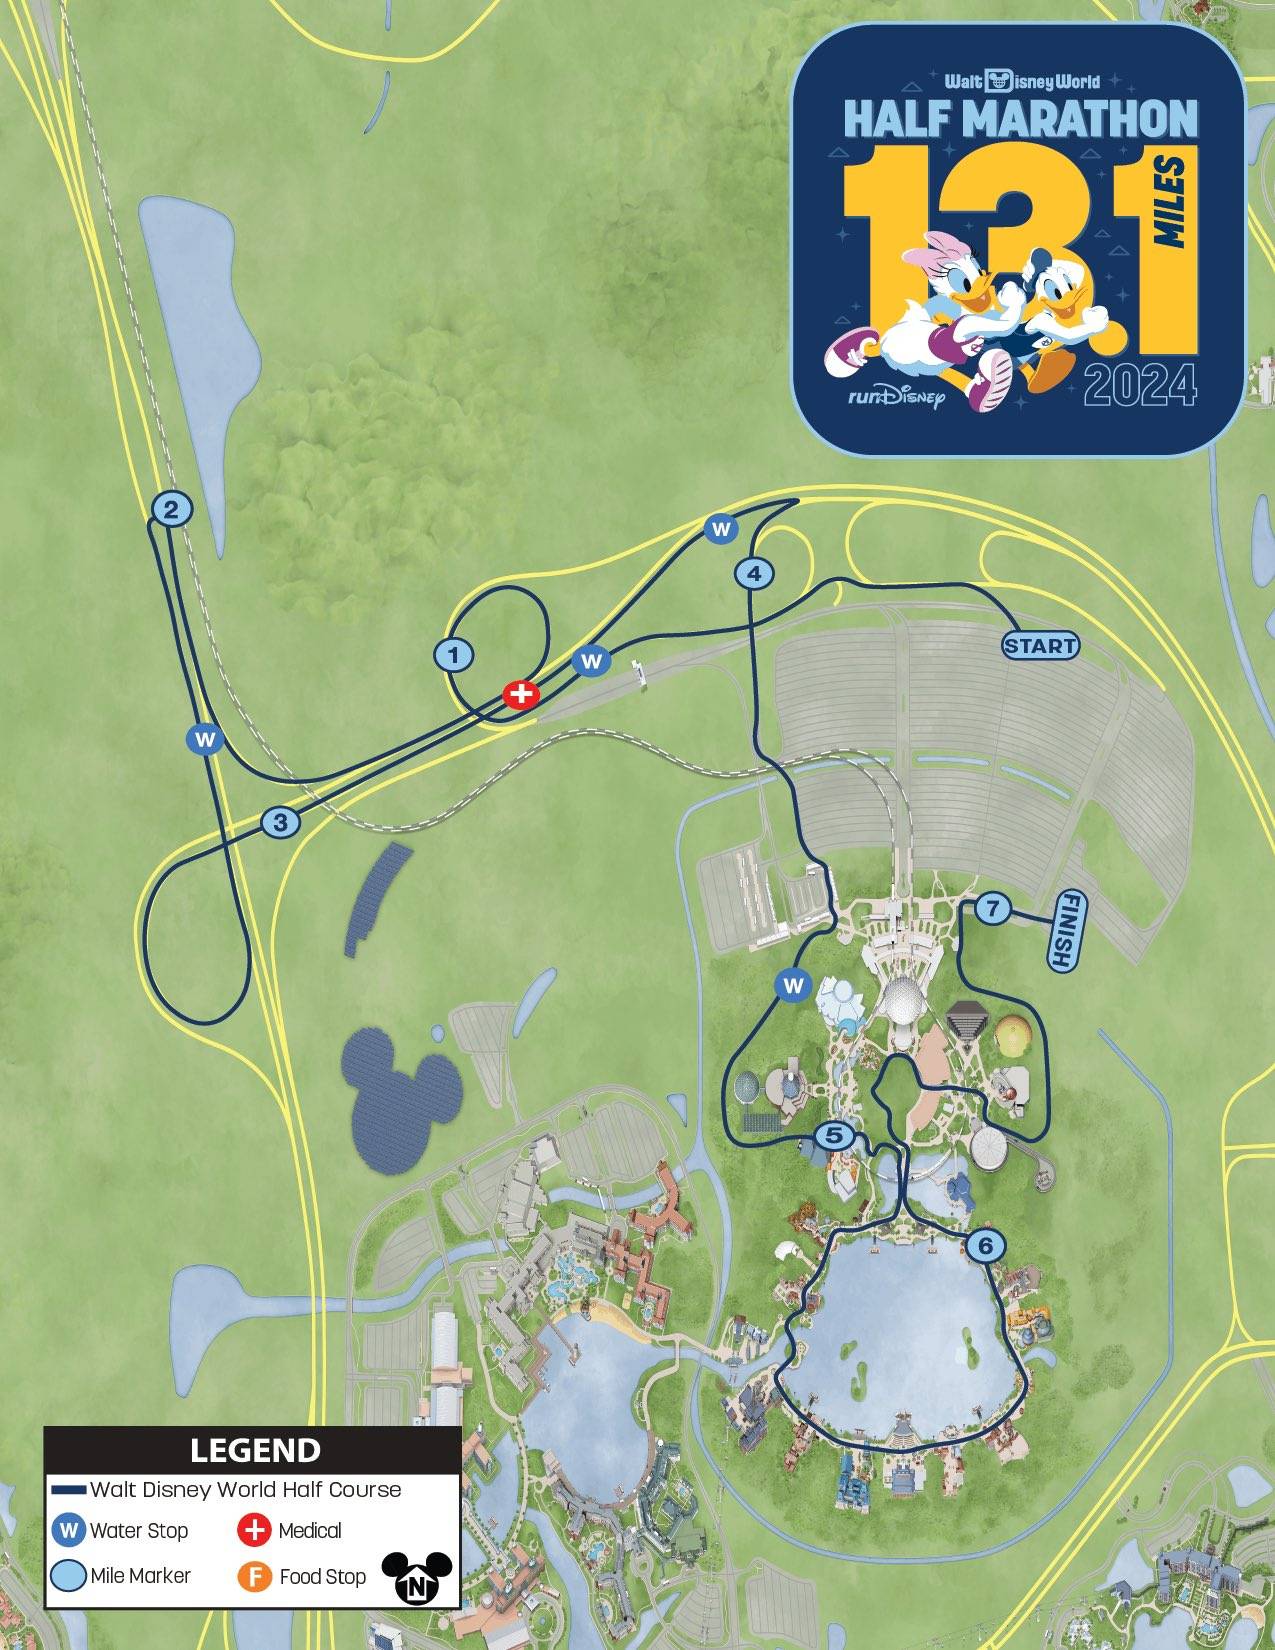 Walt Disney World Half Marathon shortened and moved to an earlier start due to severe weather forecast